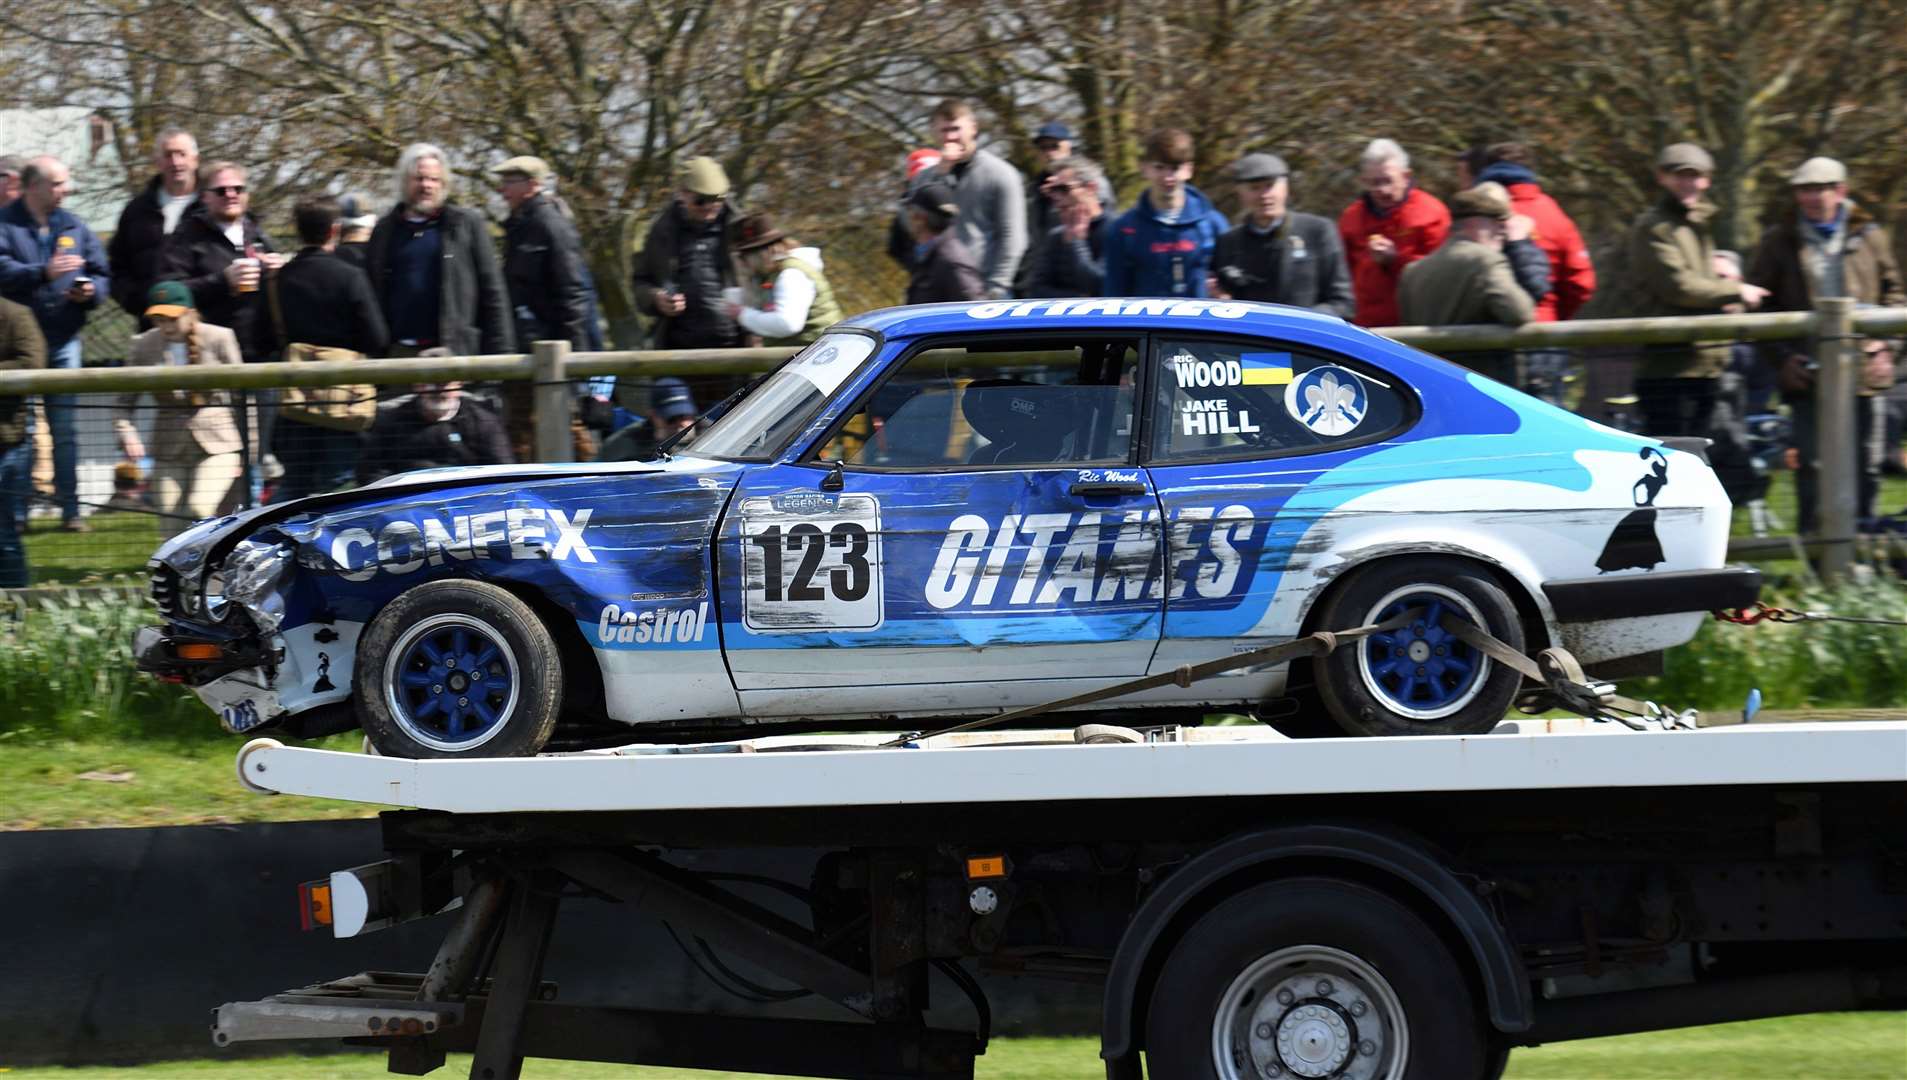 Jake Hill's Ford Capri, is brought back on a truck, after crashing during qualifying. Picture: Simon Hildrew